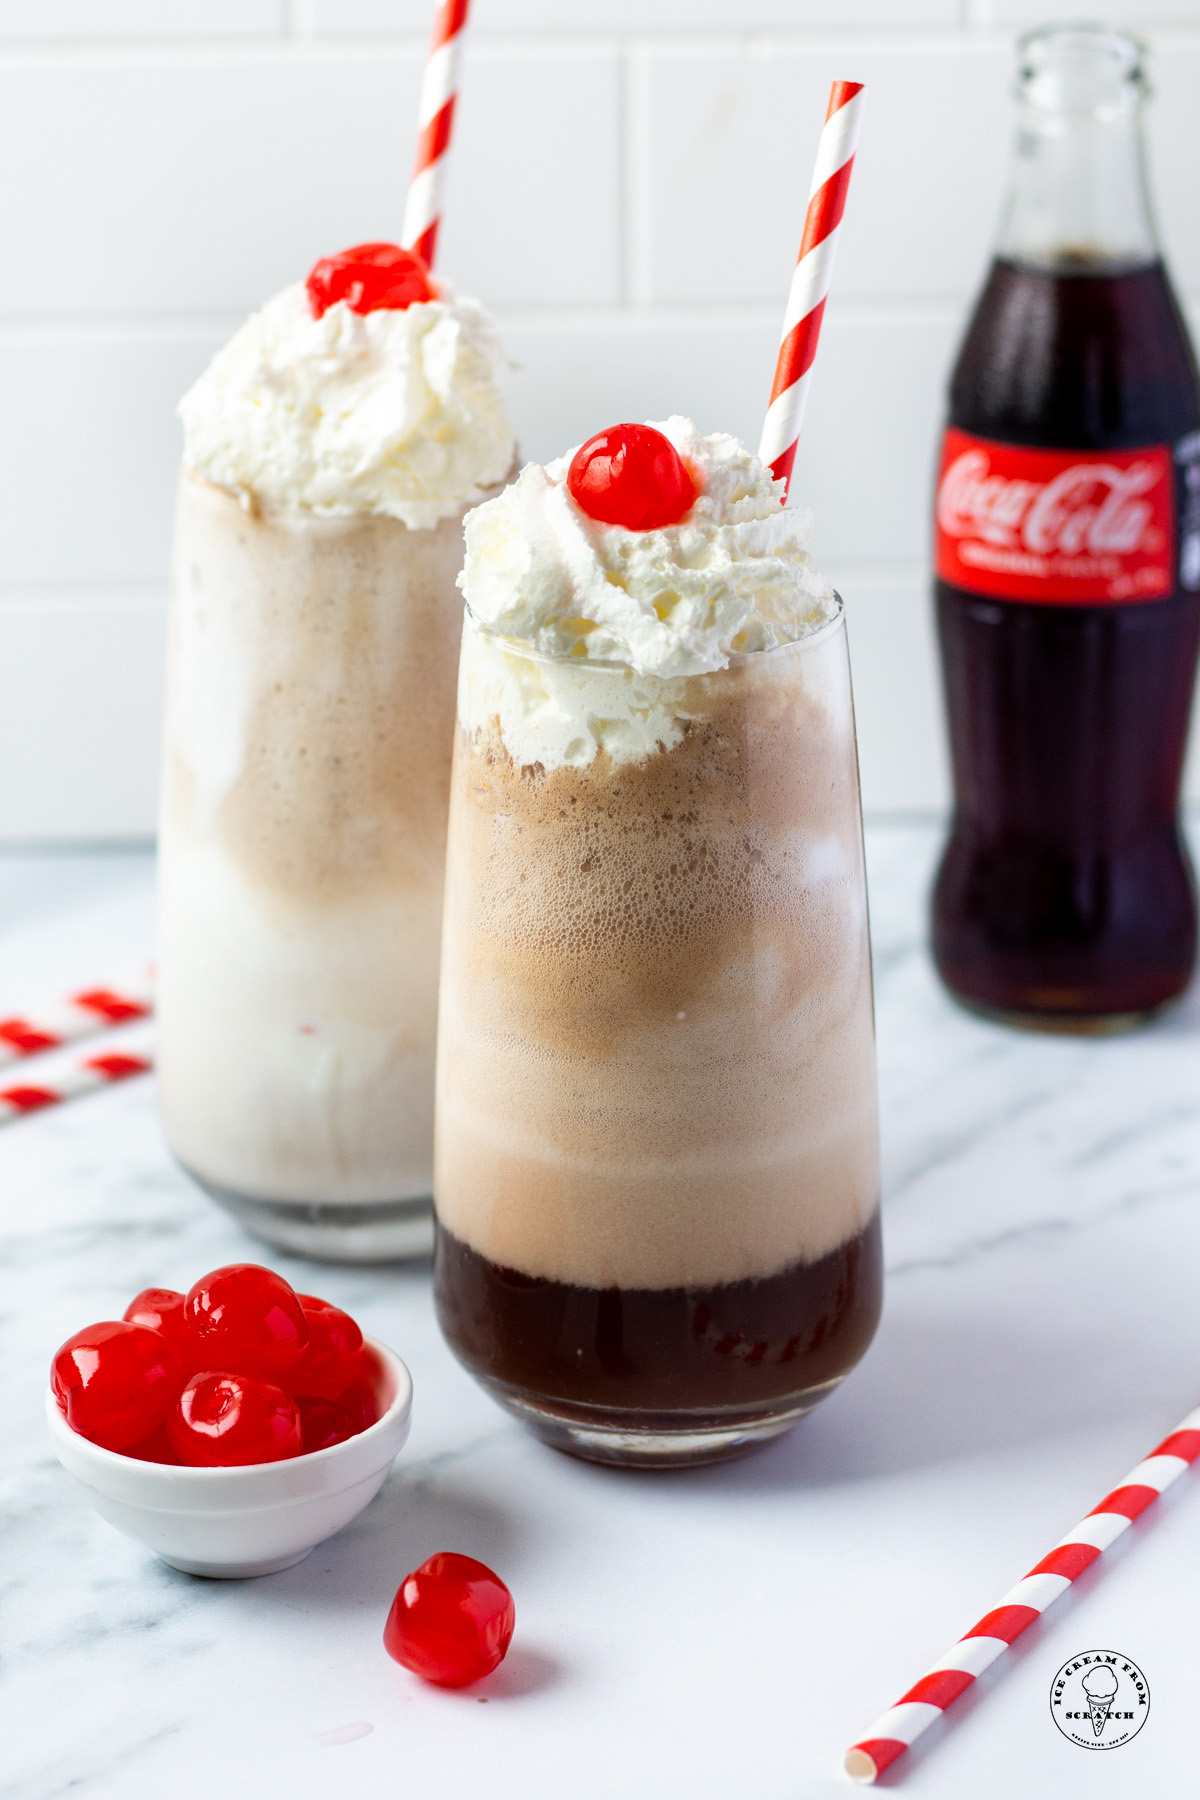 two tall glasses filled with coca cola floats with whipped cream and cherries. Each has a red and white striped straw. A glass bottle of coke is in the background